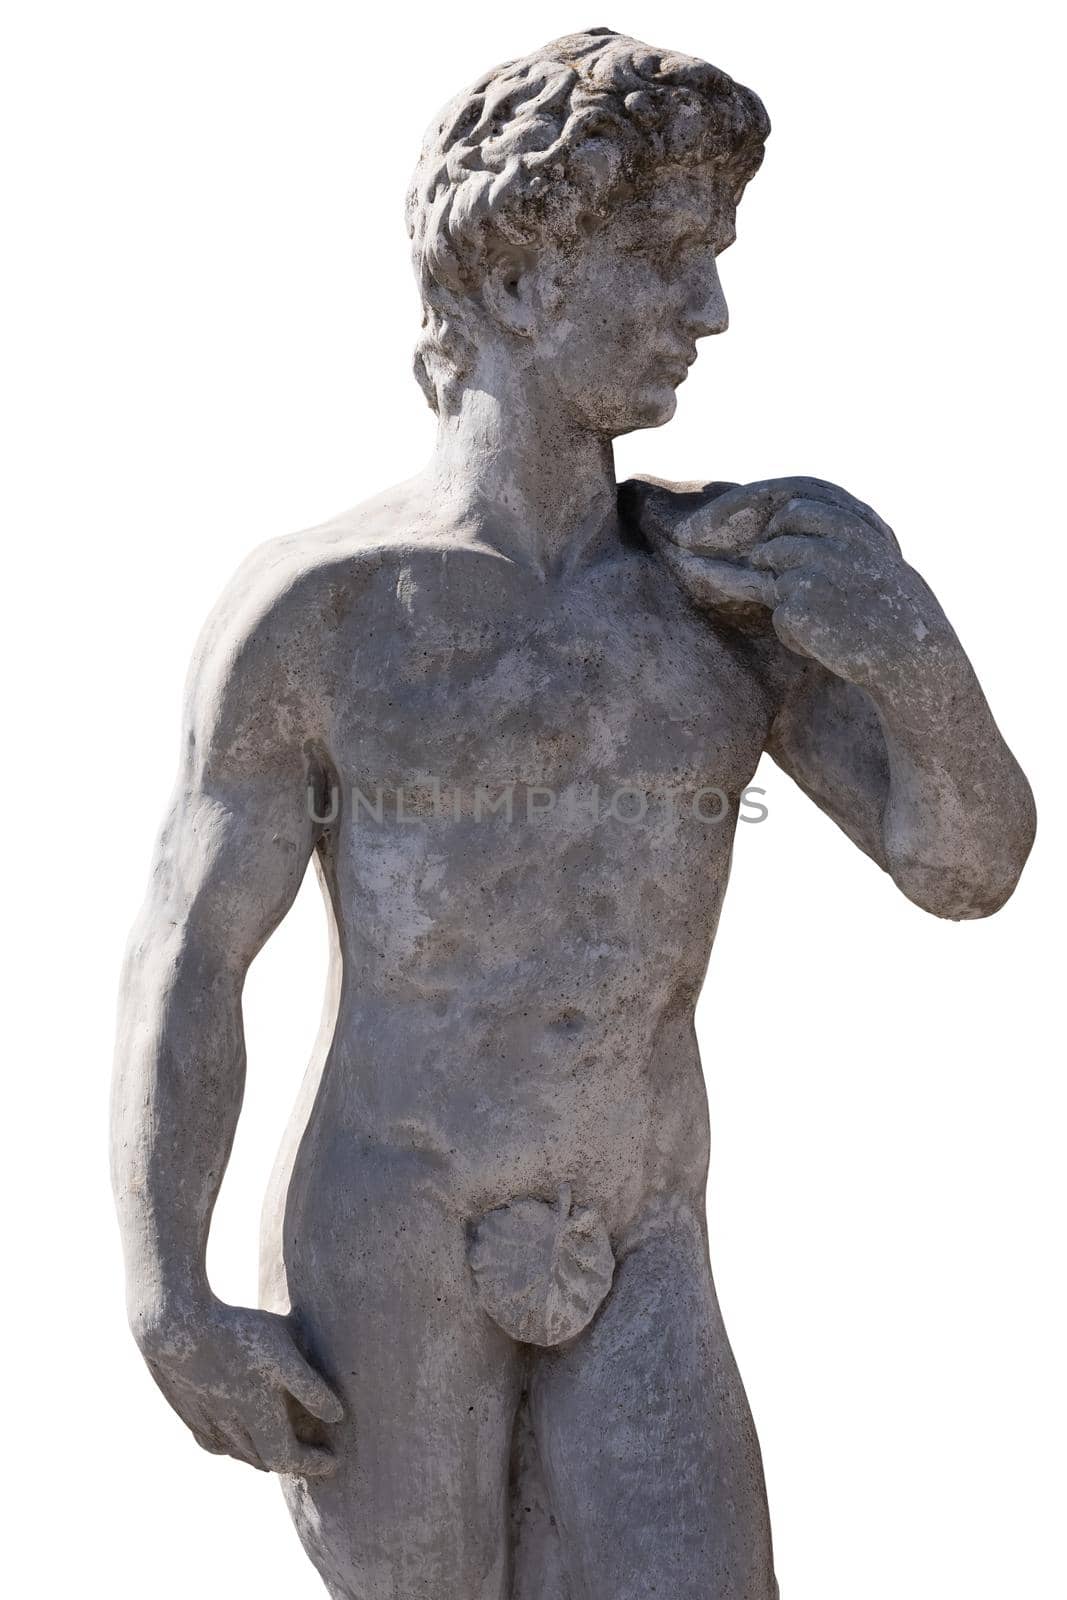 Stone sculpture of naked man on white background. art and classical style romantic figurative stone sculpture.